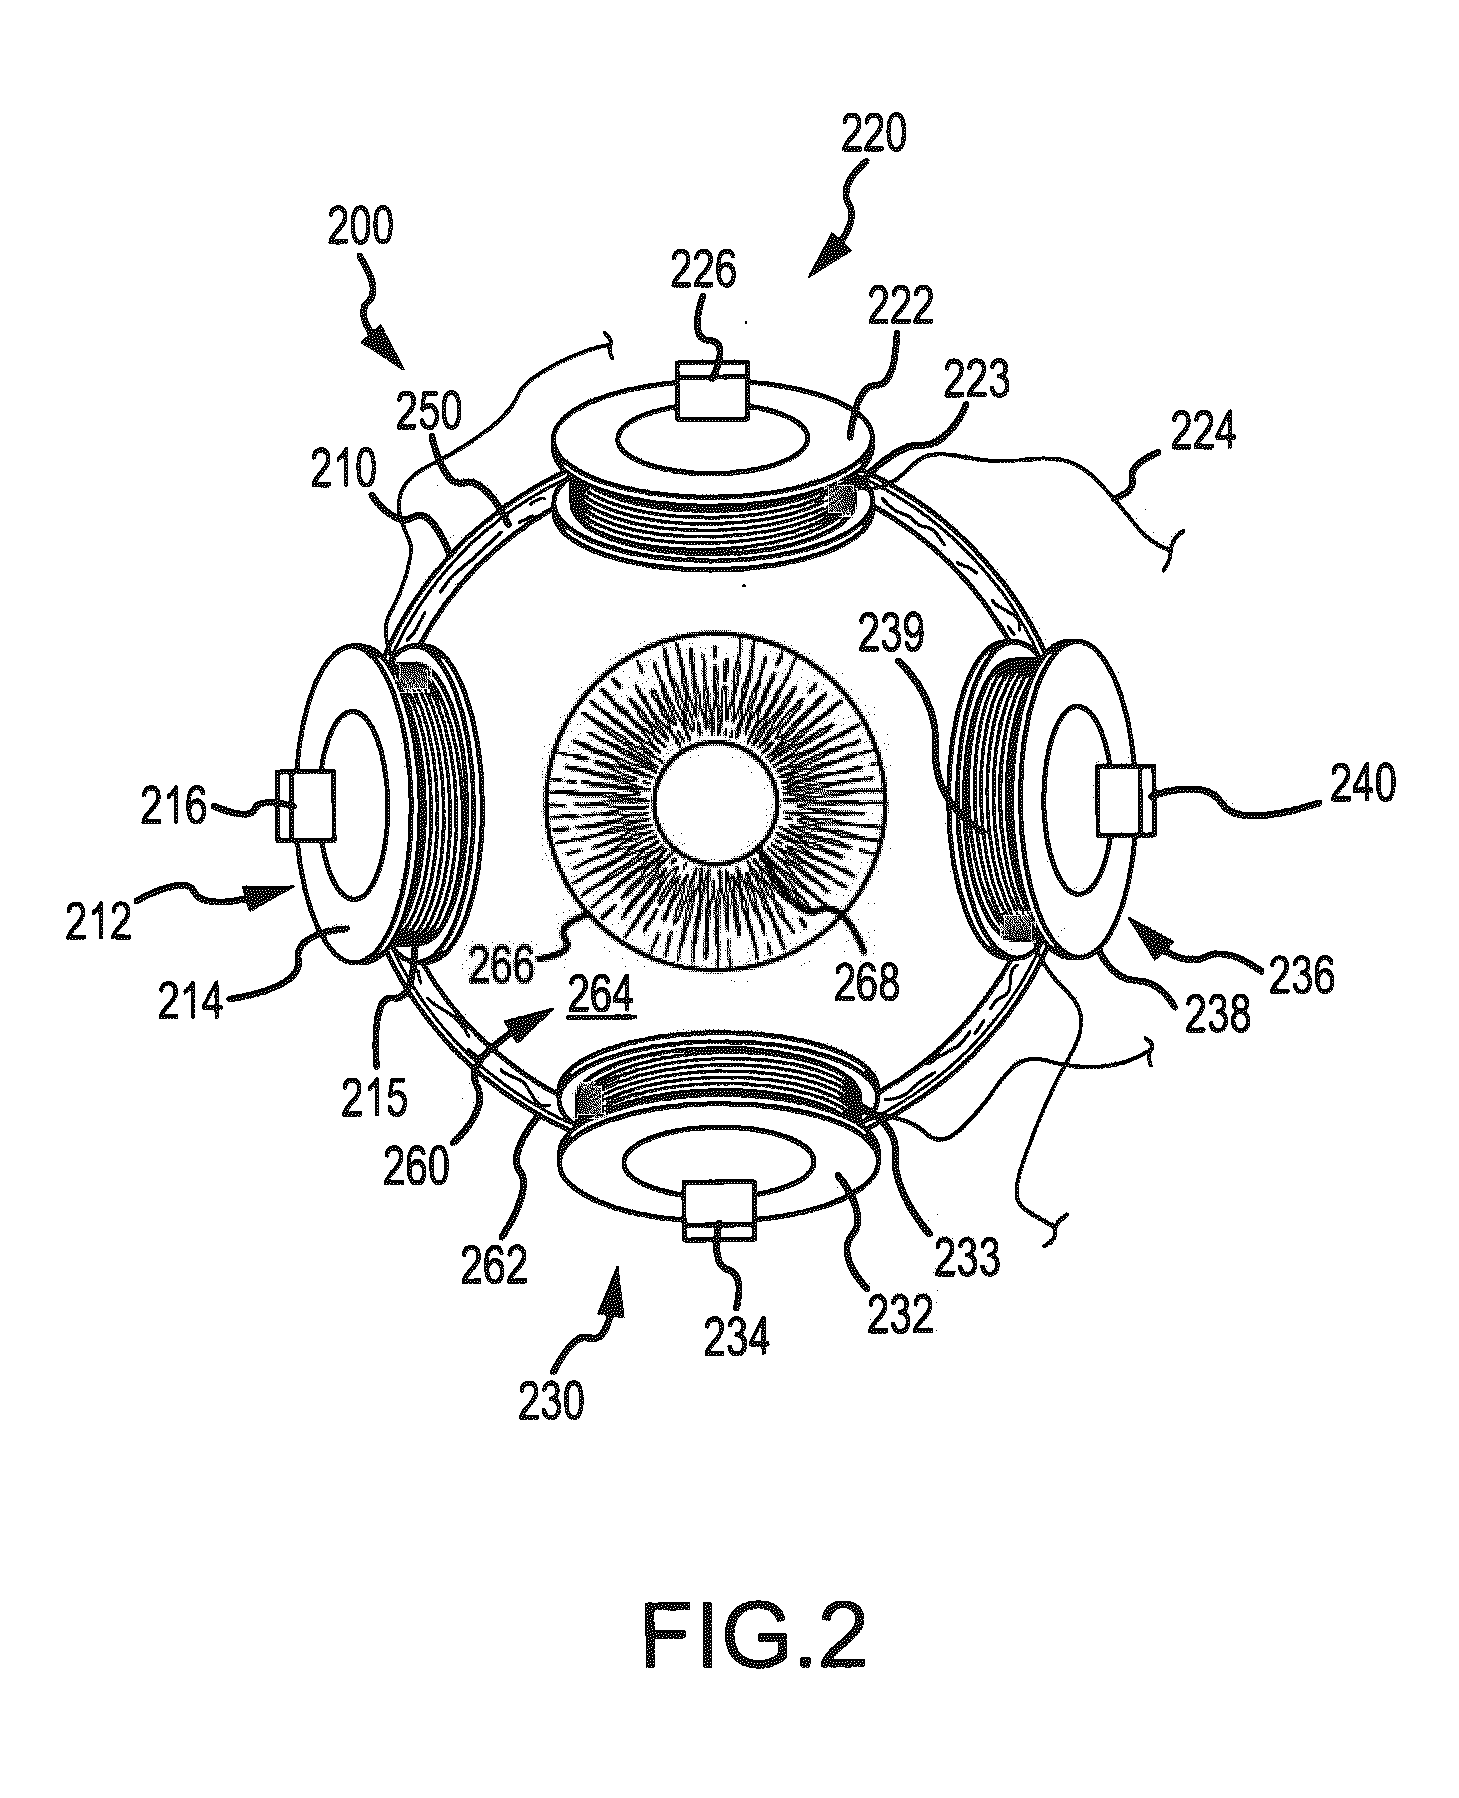 Animatronic Eye with an Electromagnetic Drive and Fluid Suspension and with Video Capability